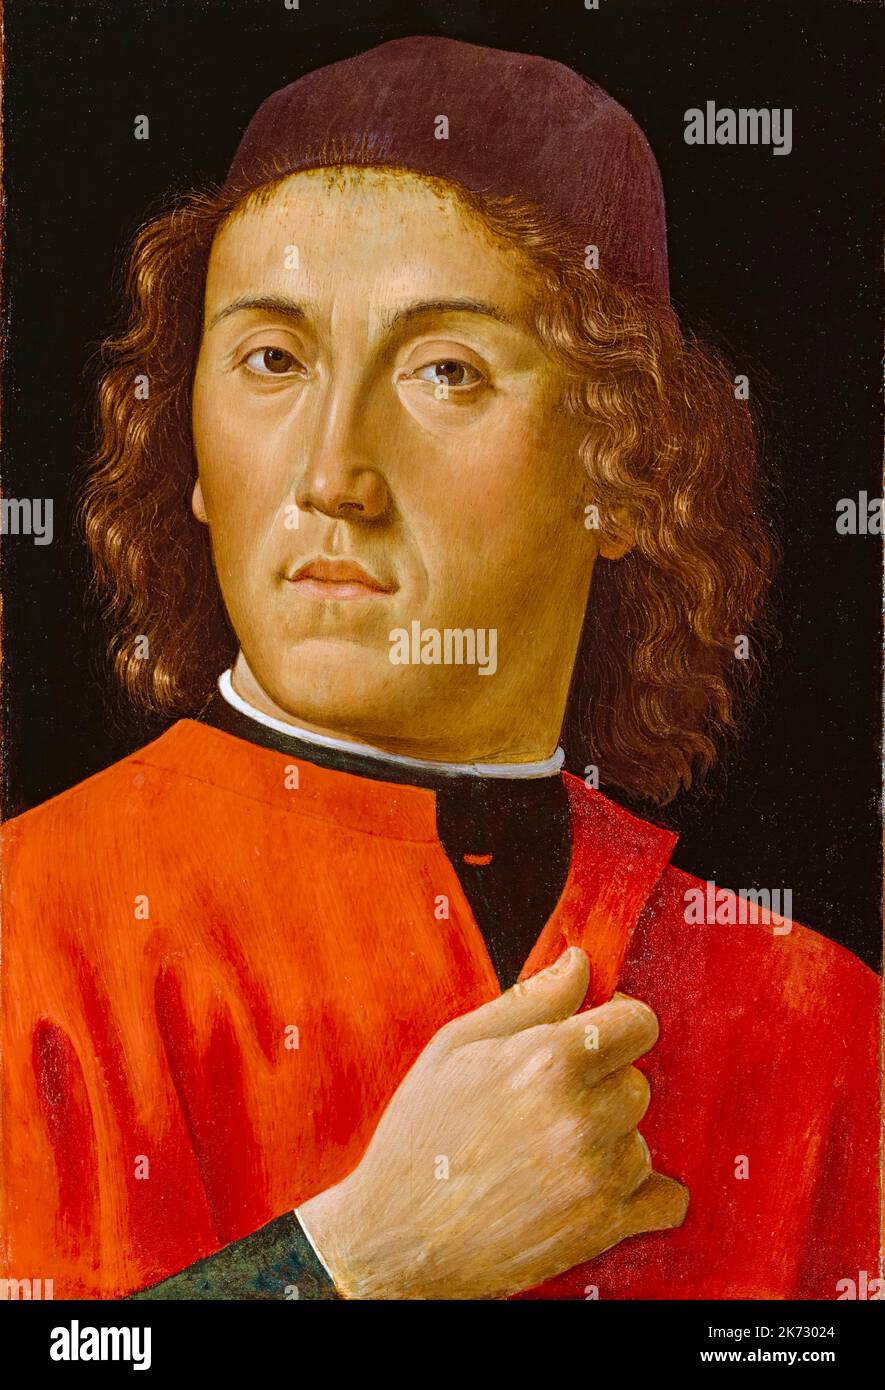 Domenico Ghirlandaio, Young Man, portrait painting in oil on panel, 1448-1494 Stock Photo